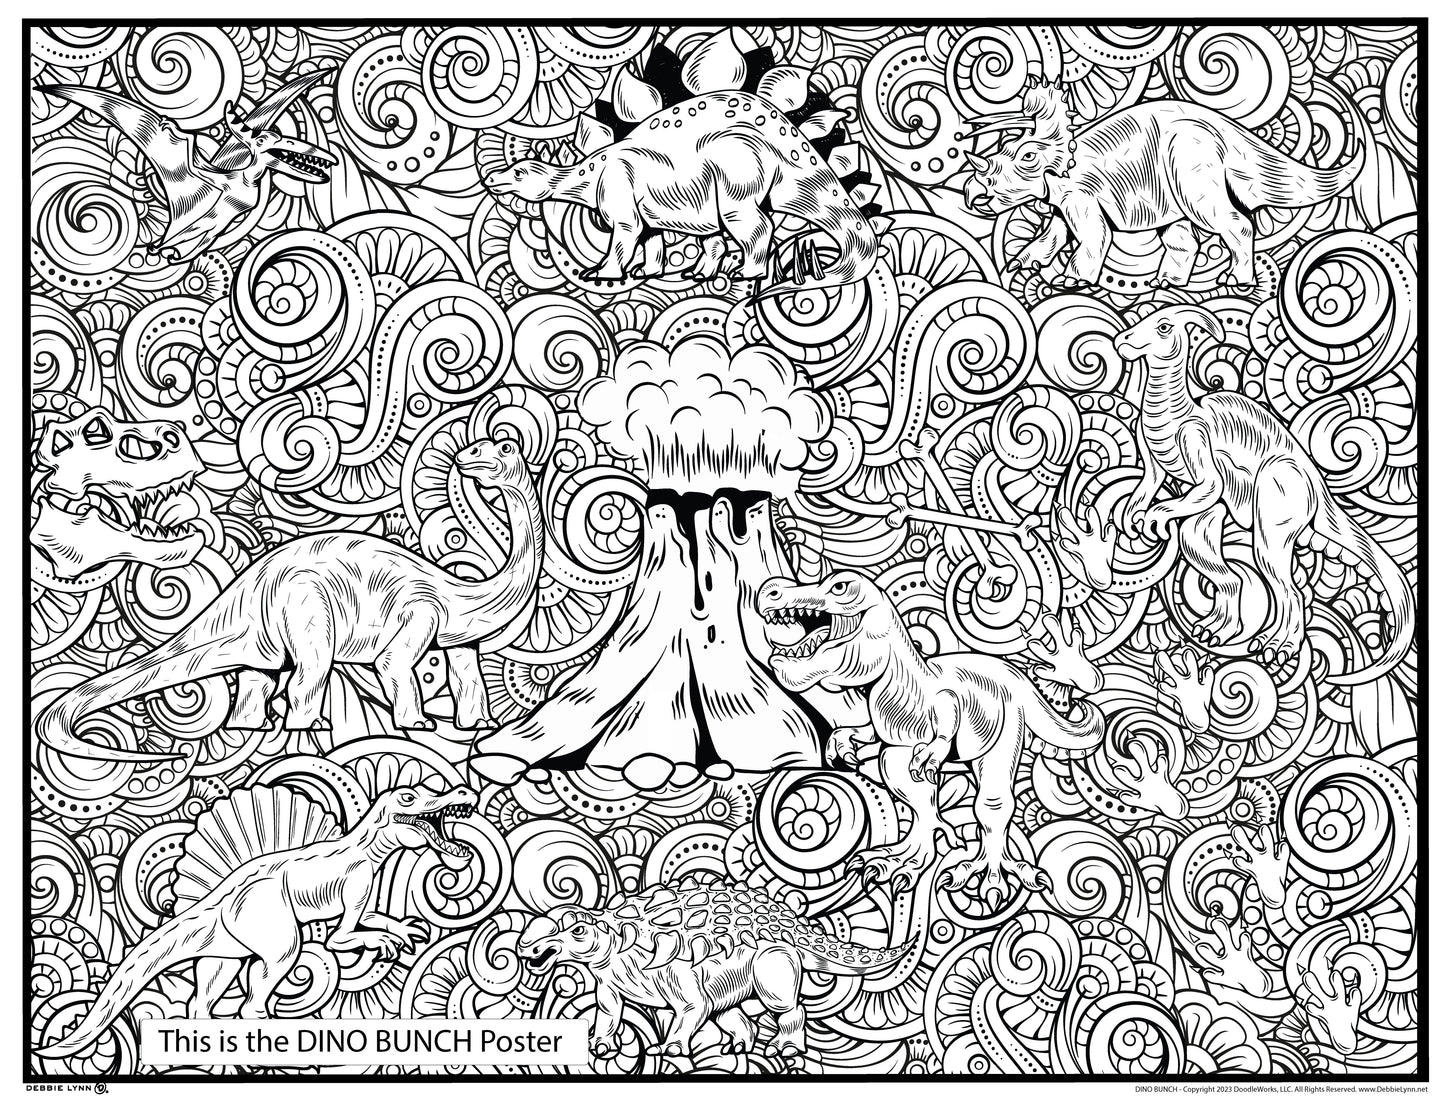 Dinosaur Bunch Personalized Giant Coloring Poster  46"x60"